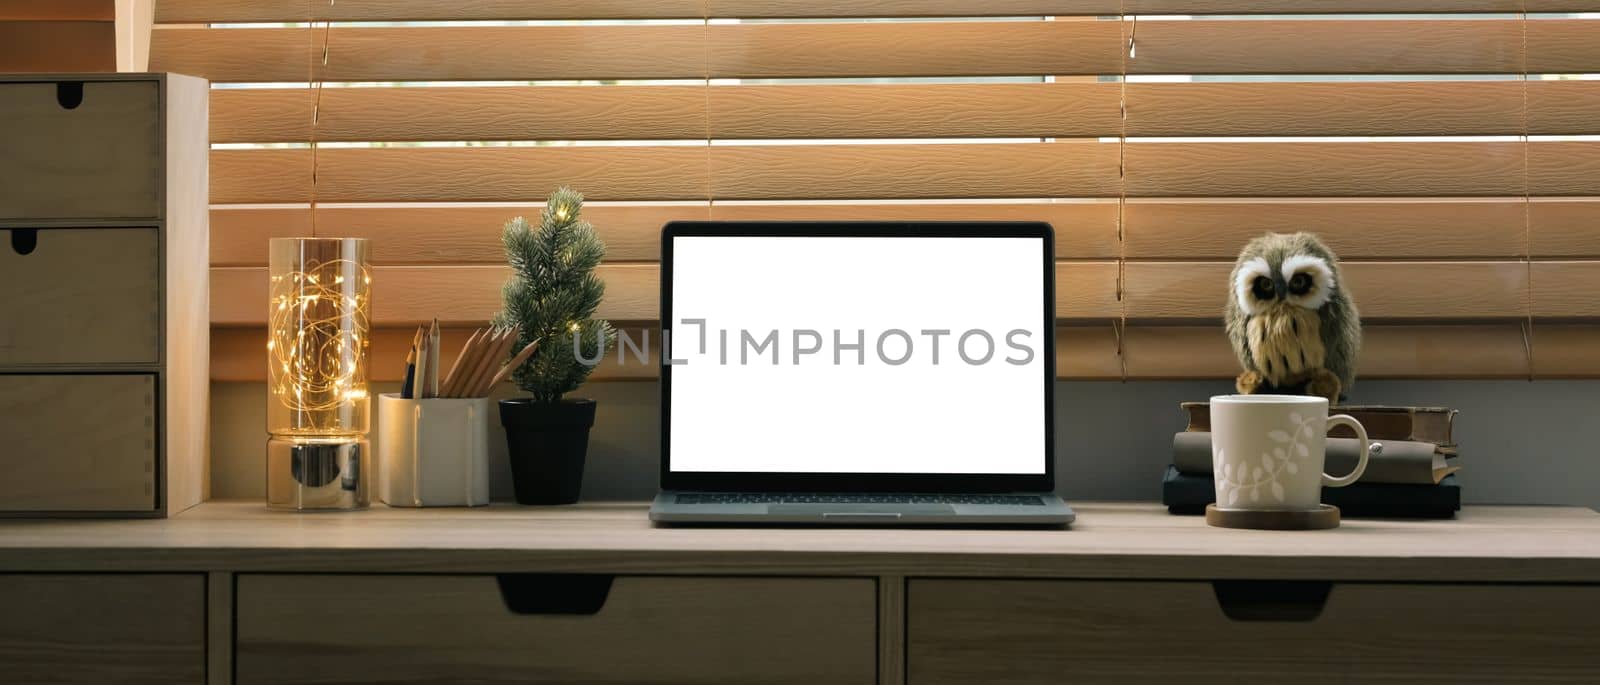 Front view laptop computer with white display on wooden counter near blinds window by prathanchorruangsak